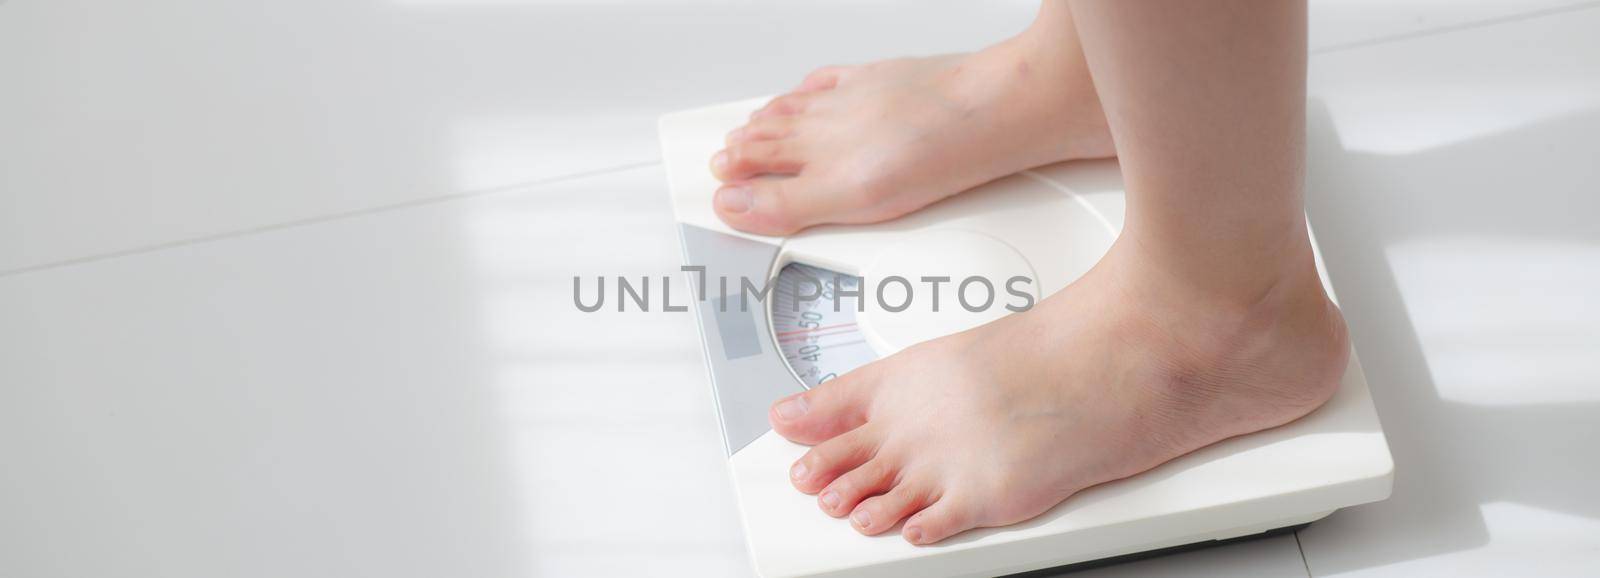 Lifestyle activity with leg of woman stand measuring weight scale for diet with barefoot, closeup foot of girl slim weight loss measure for food control, healthy care concept, banner website.